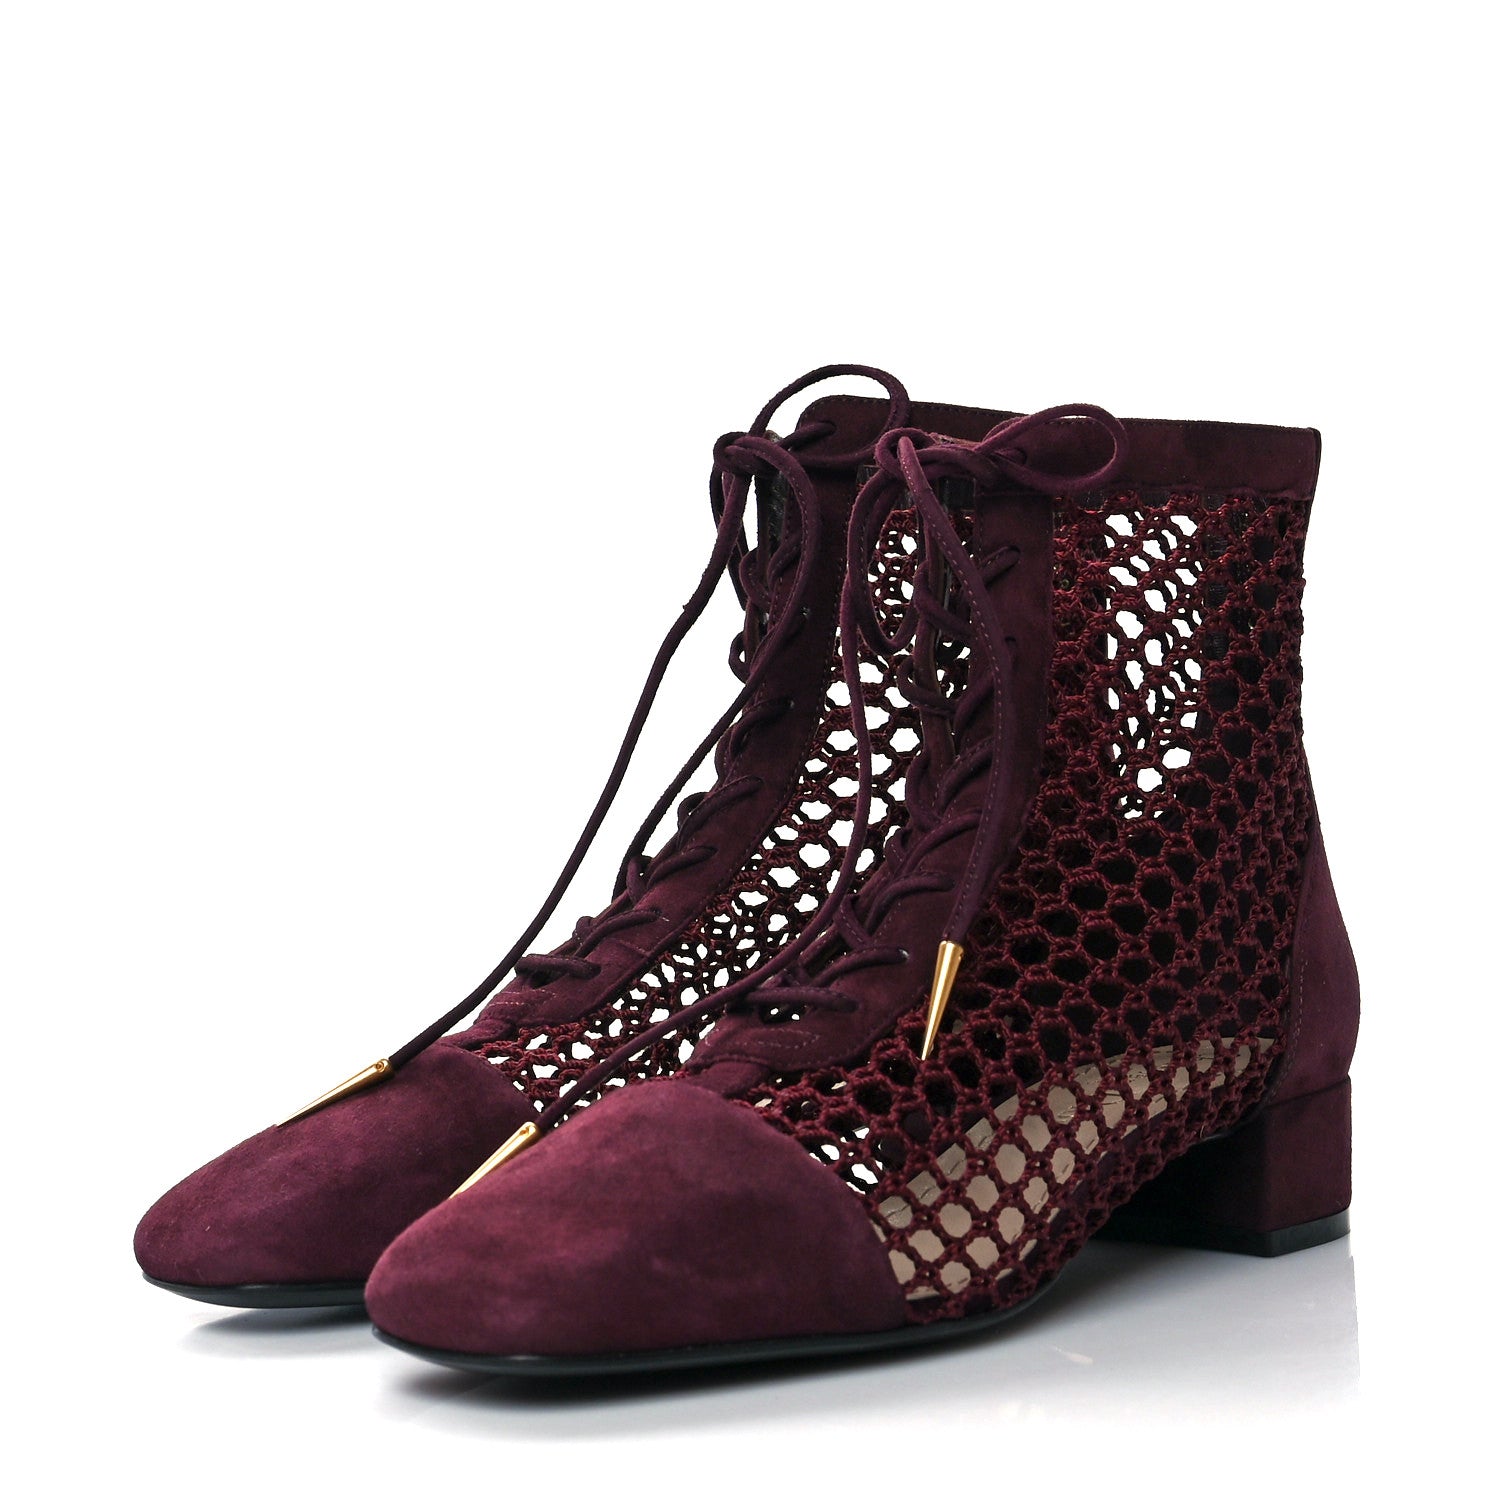 Naughtily-D lace up boots